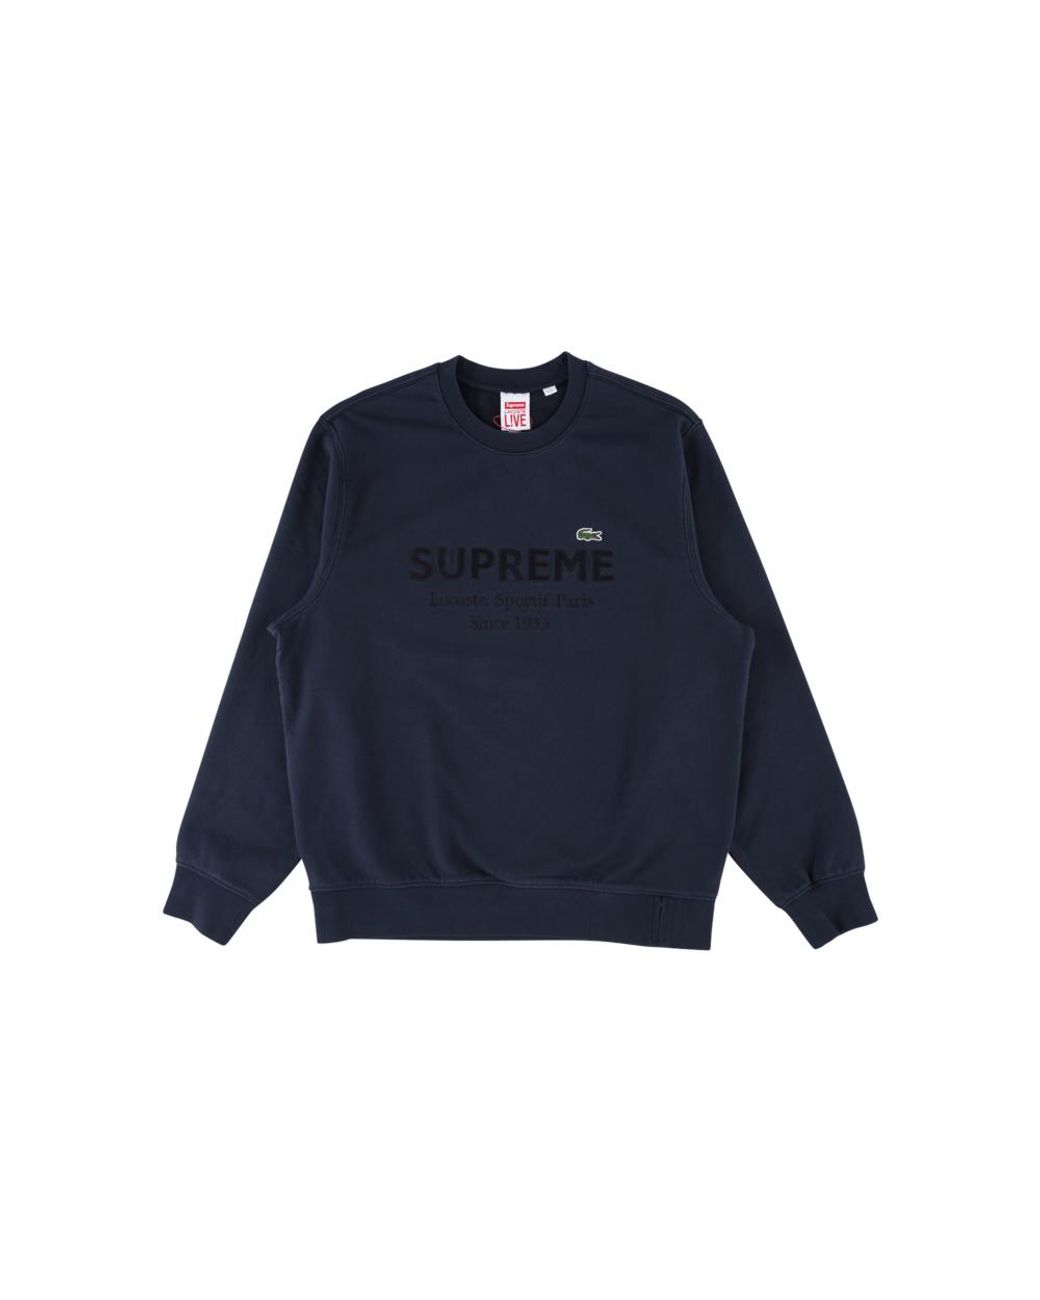 Supreme Lacoste Crewneck T-shirt 'ss 18' in Navy (Blue) for Men - Save